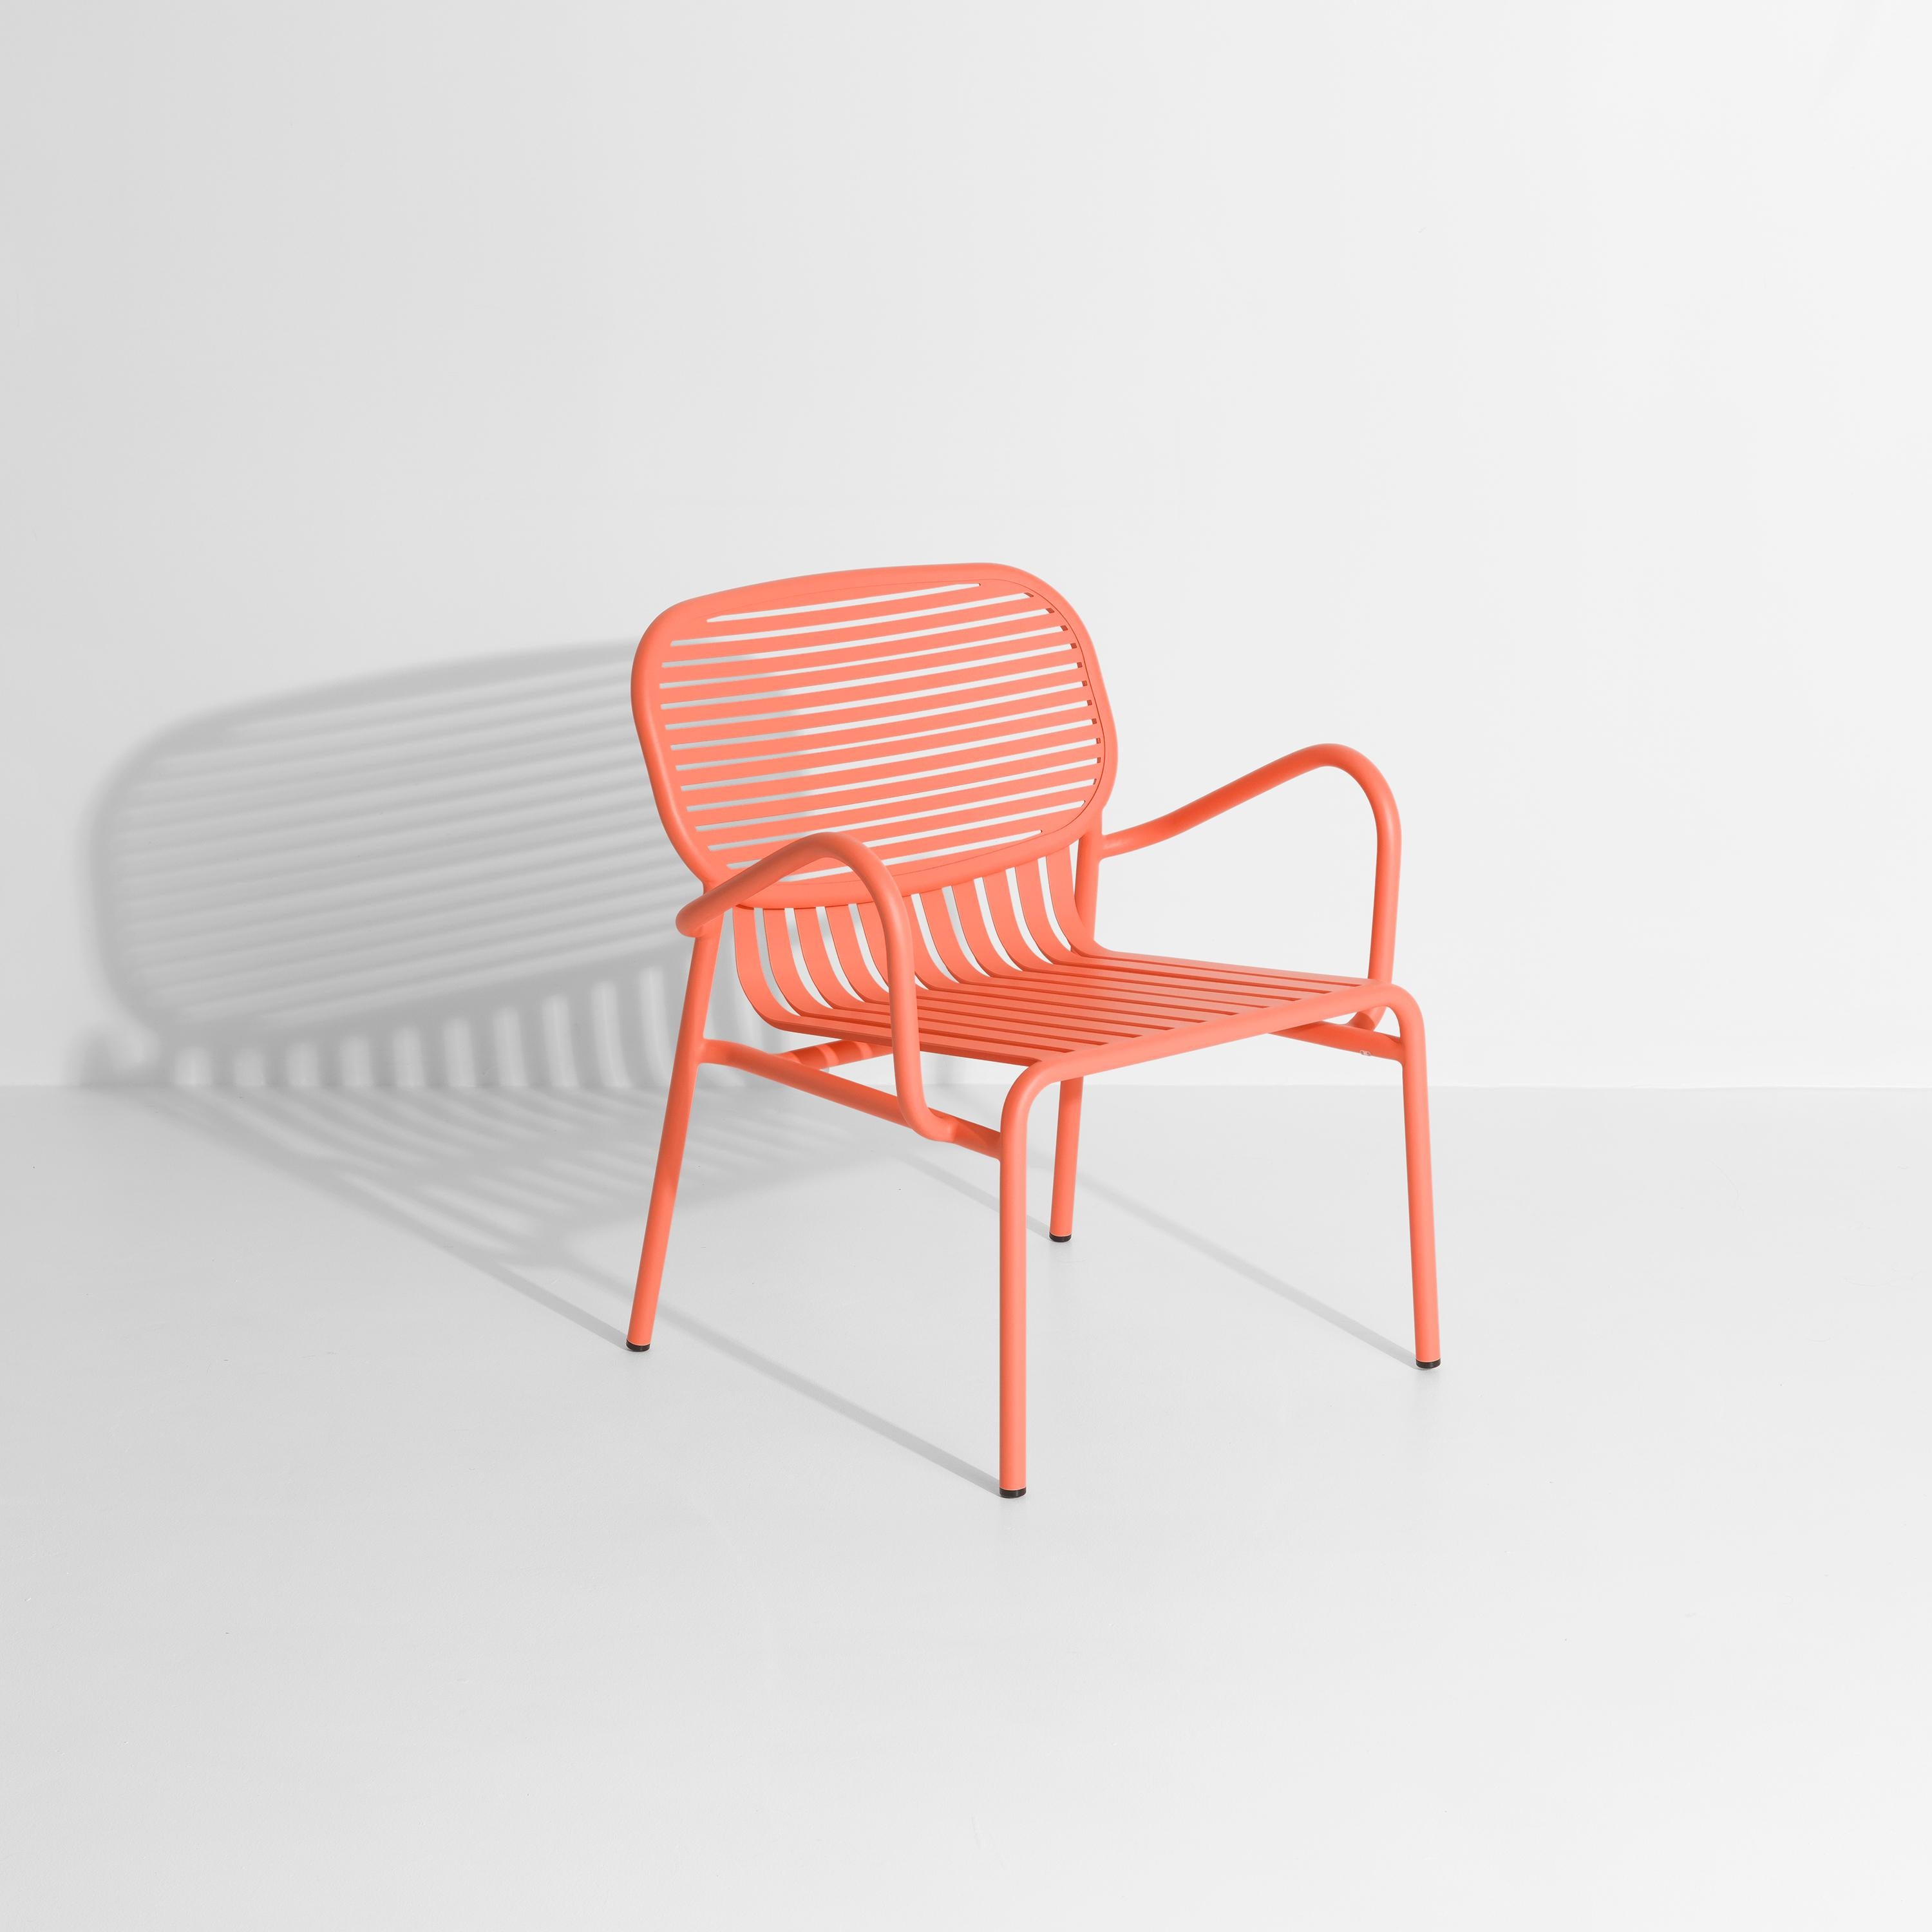 Petite Friture Week-End Armchair in Coral Aluminium by Studio BrichetZiegler, 2017

The week-end collection is a full range of outdoor furniture, in aluminium grained epoxy paint, matt finish, that includes 18 functions and 8 colours for the